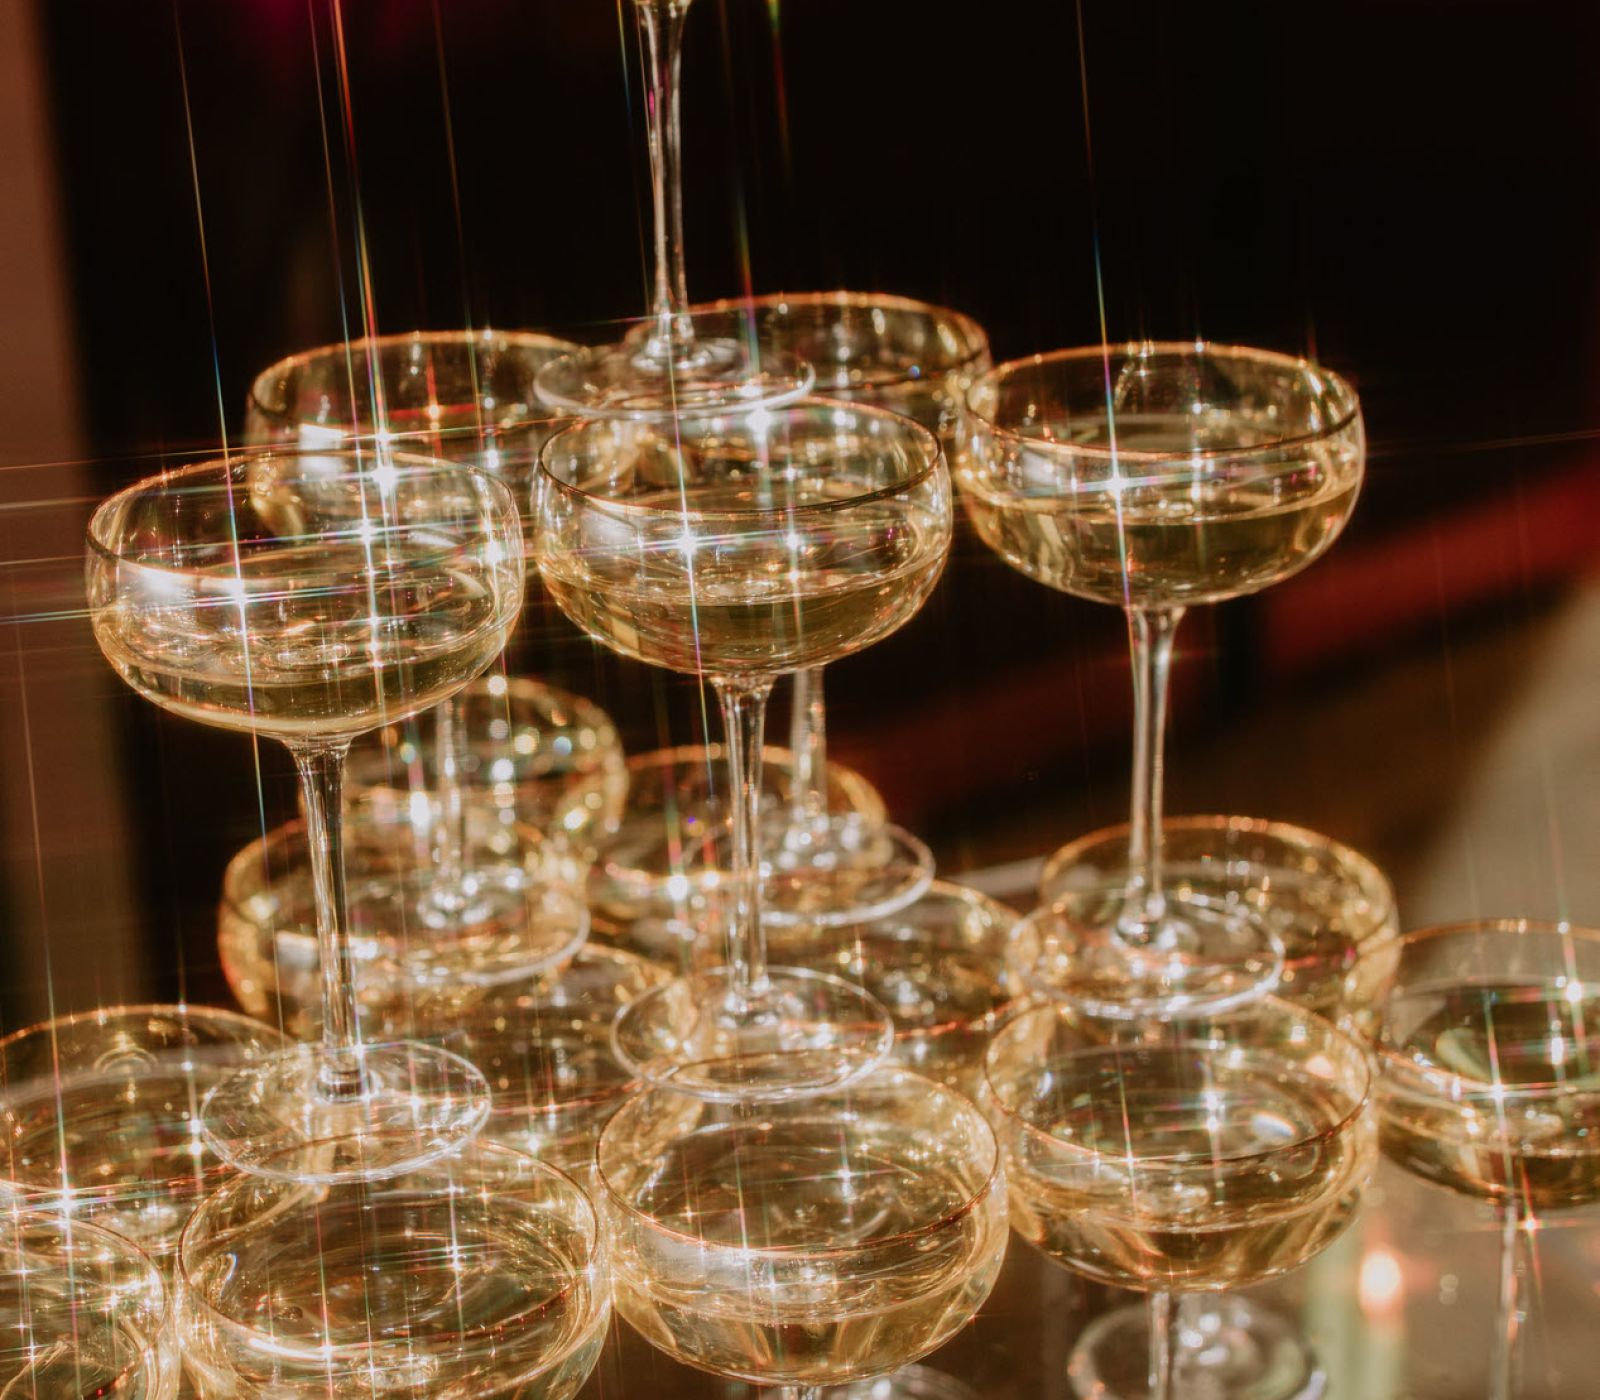 Champagne glasses in a tower configuration being filled.